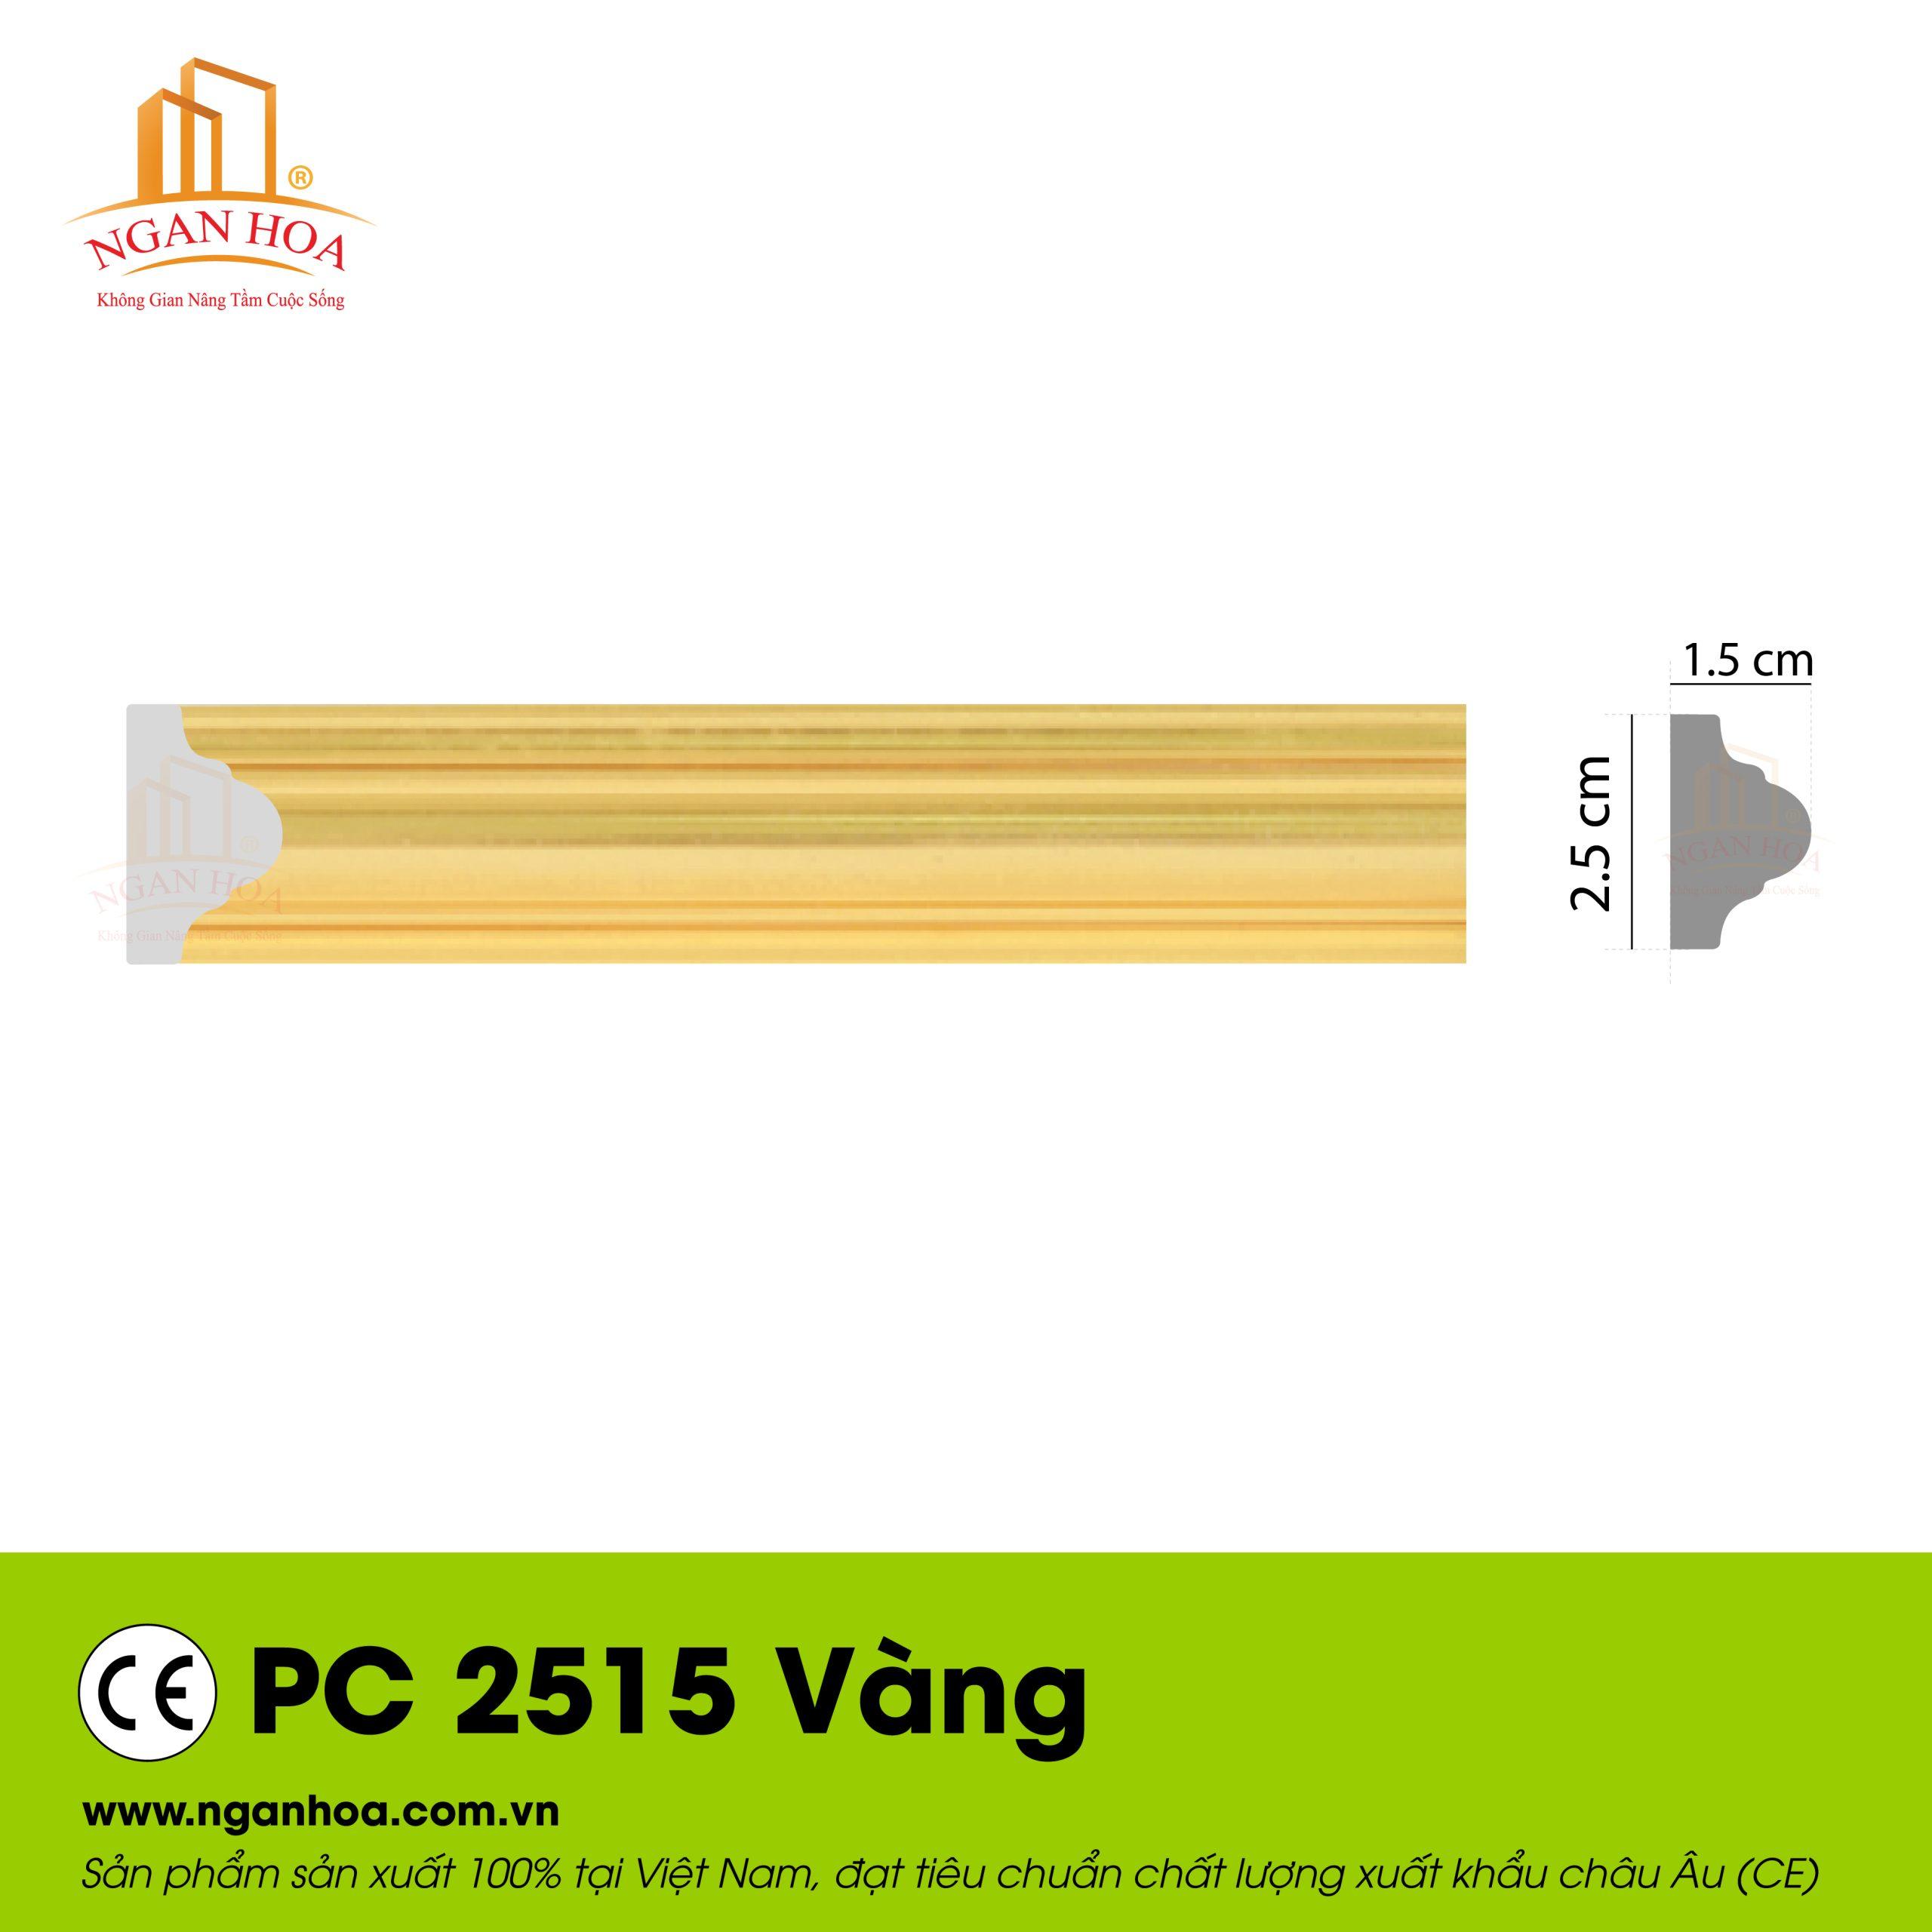 PC 2515 Vang scaled